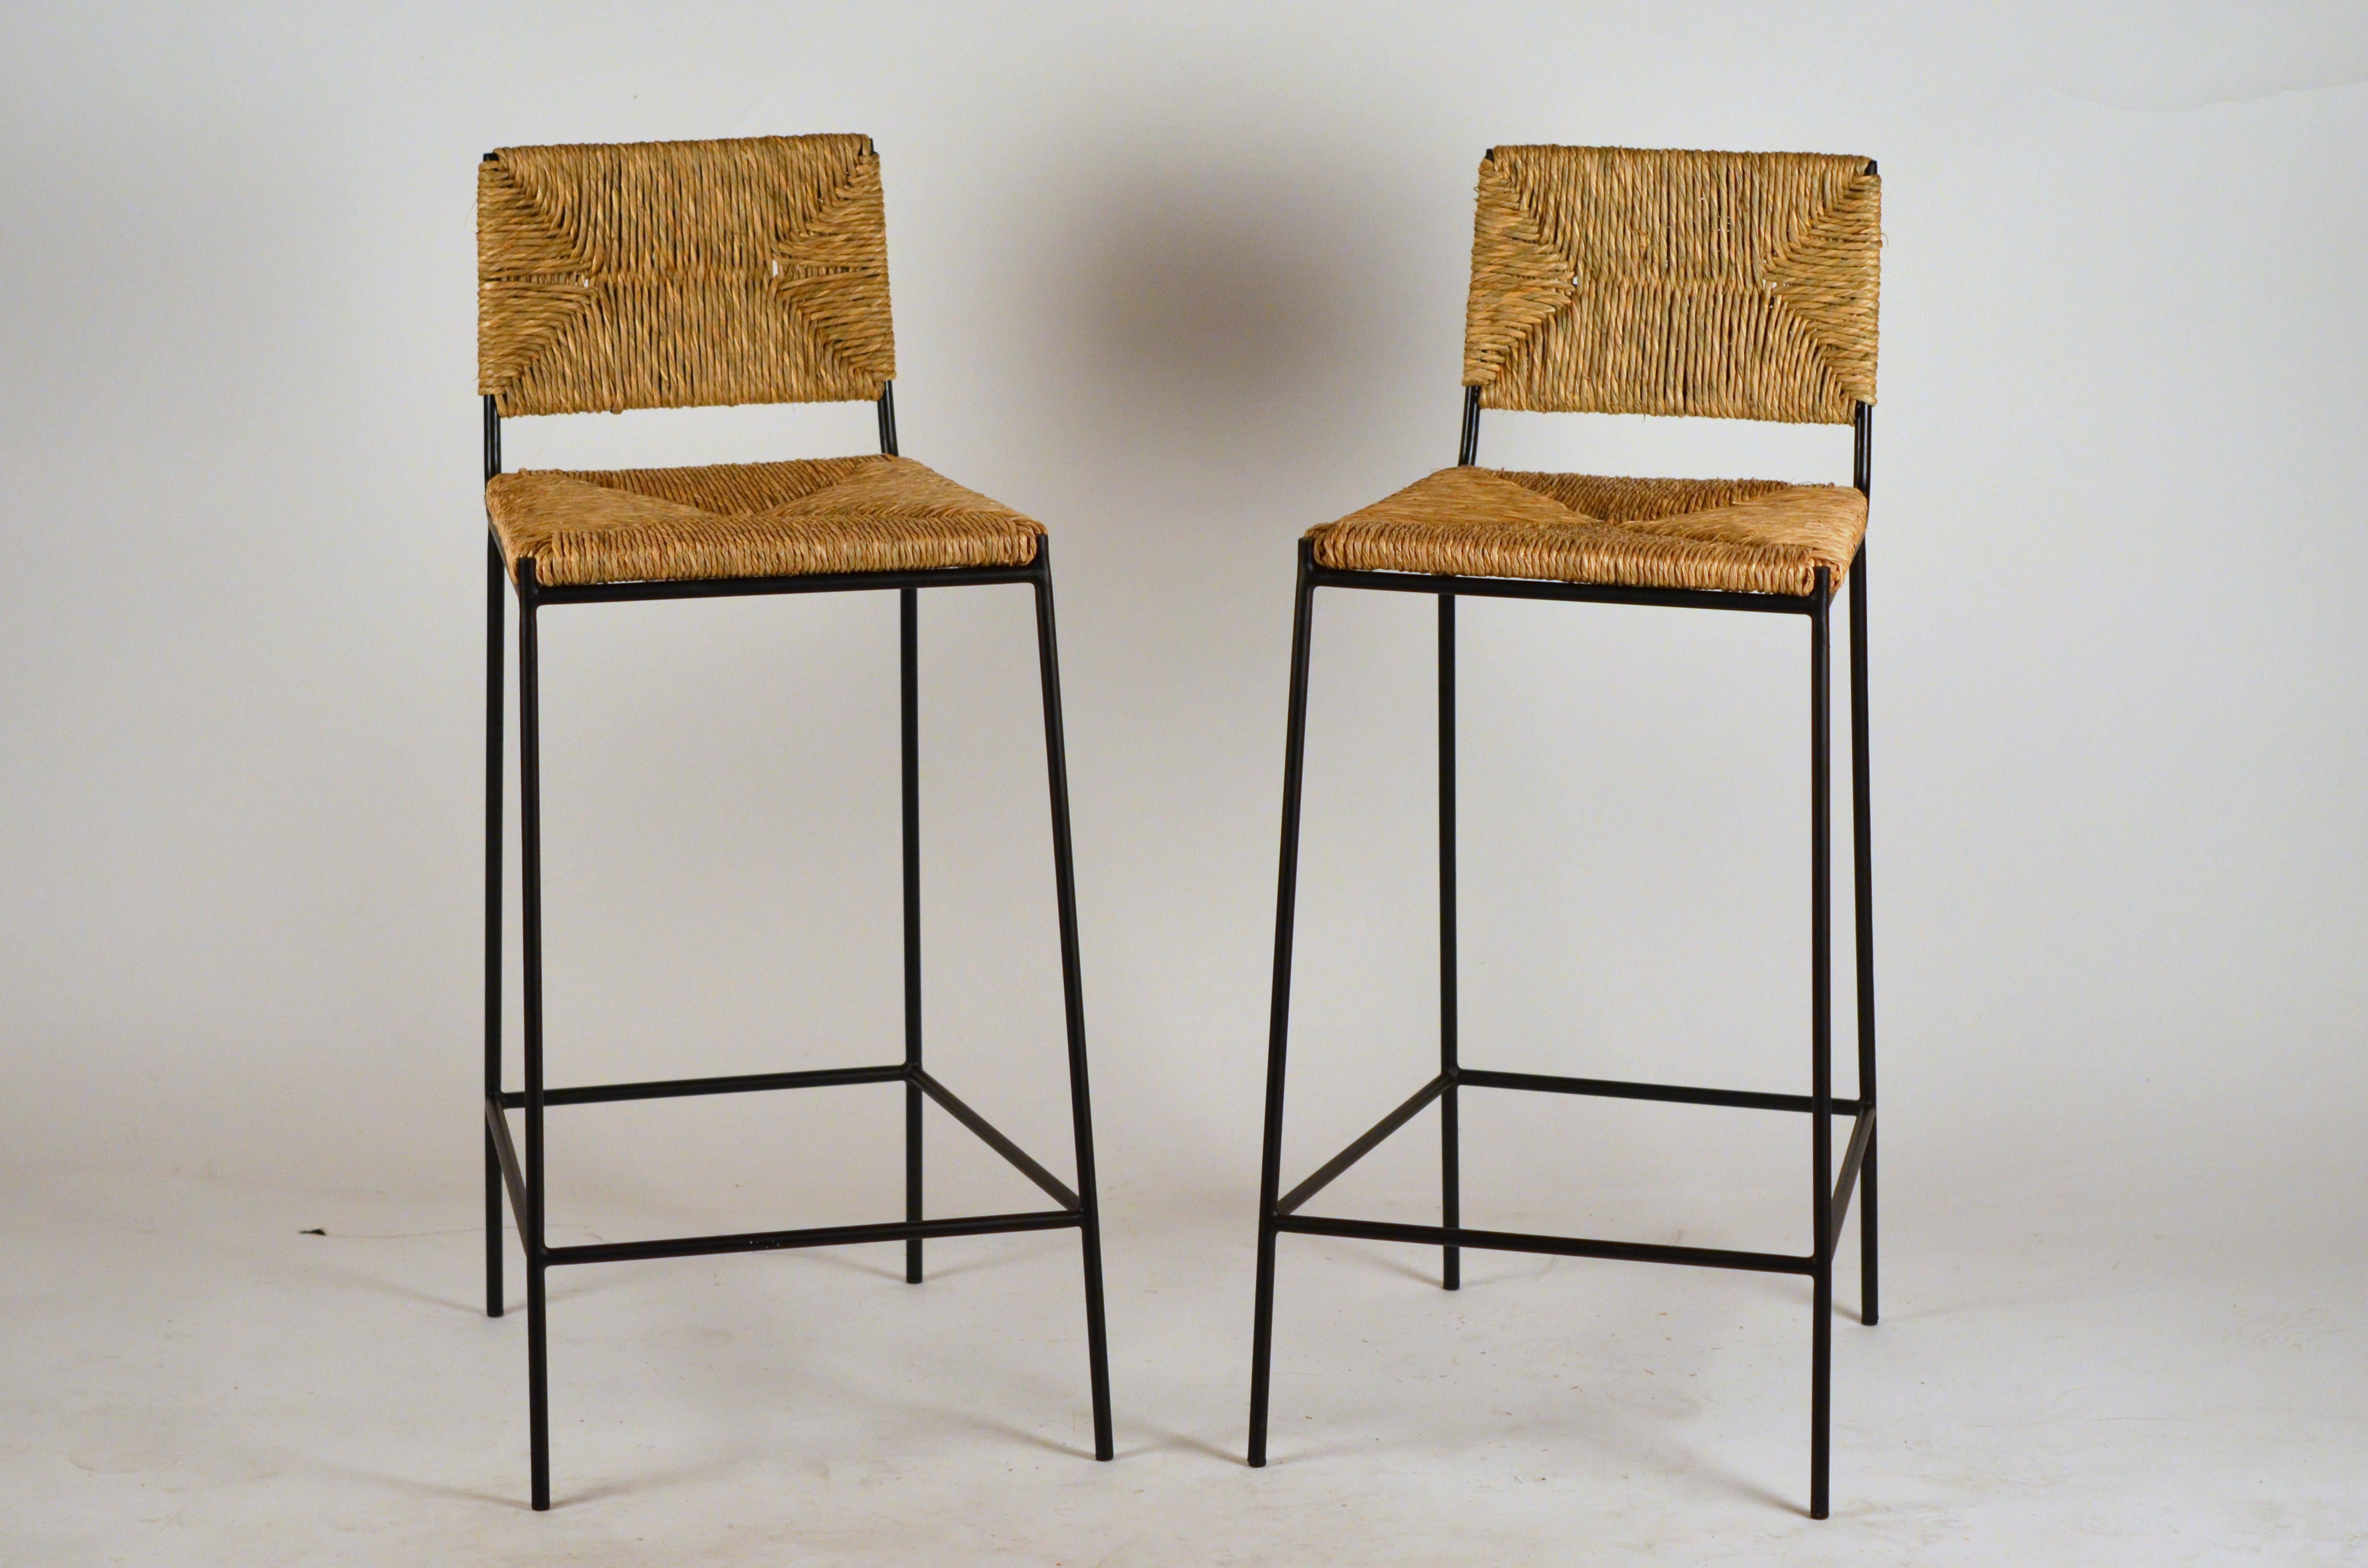 Pair of 'Campagne' counter height stools by Design Frères.

Chic combination of slender but sturdy powder coated steel frames with handwoven rush seats and backs. Extra support under the rush seats for durability. Protective plastic caps on the